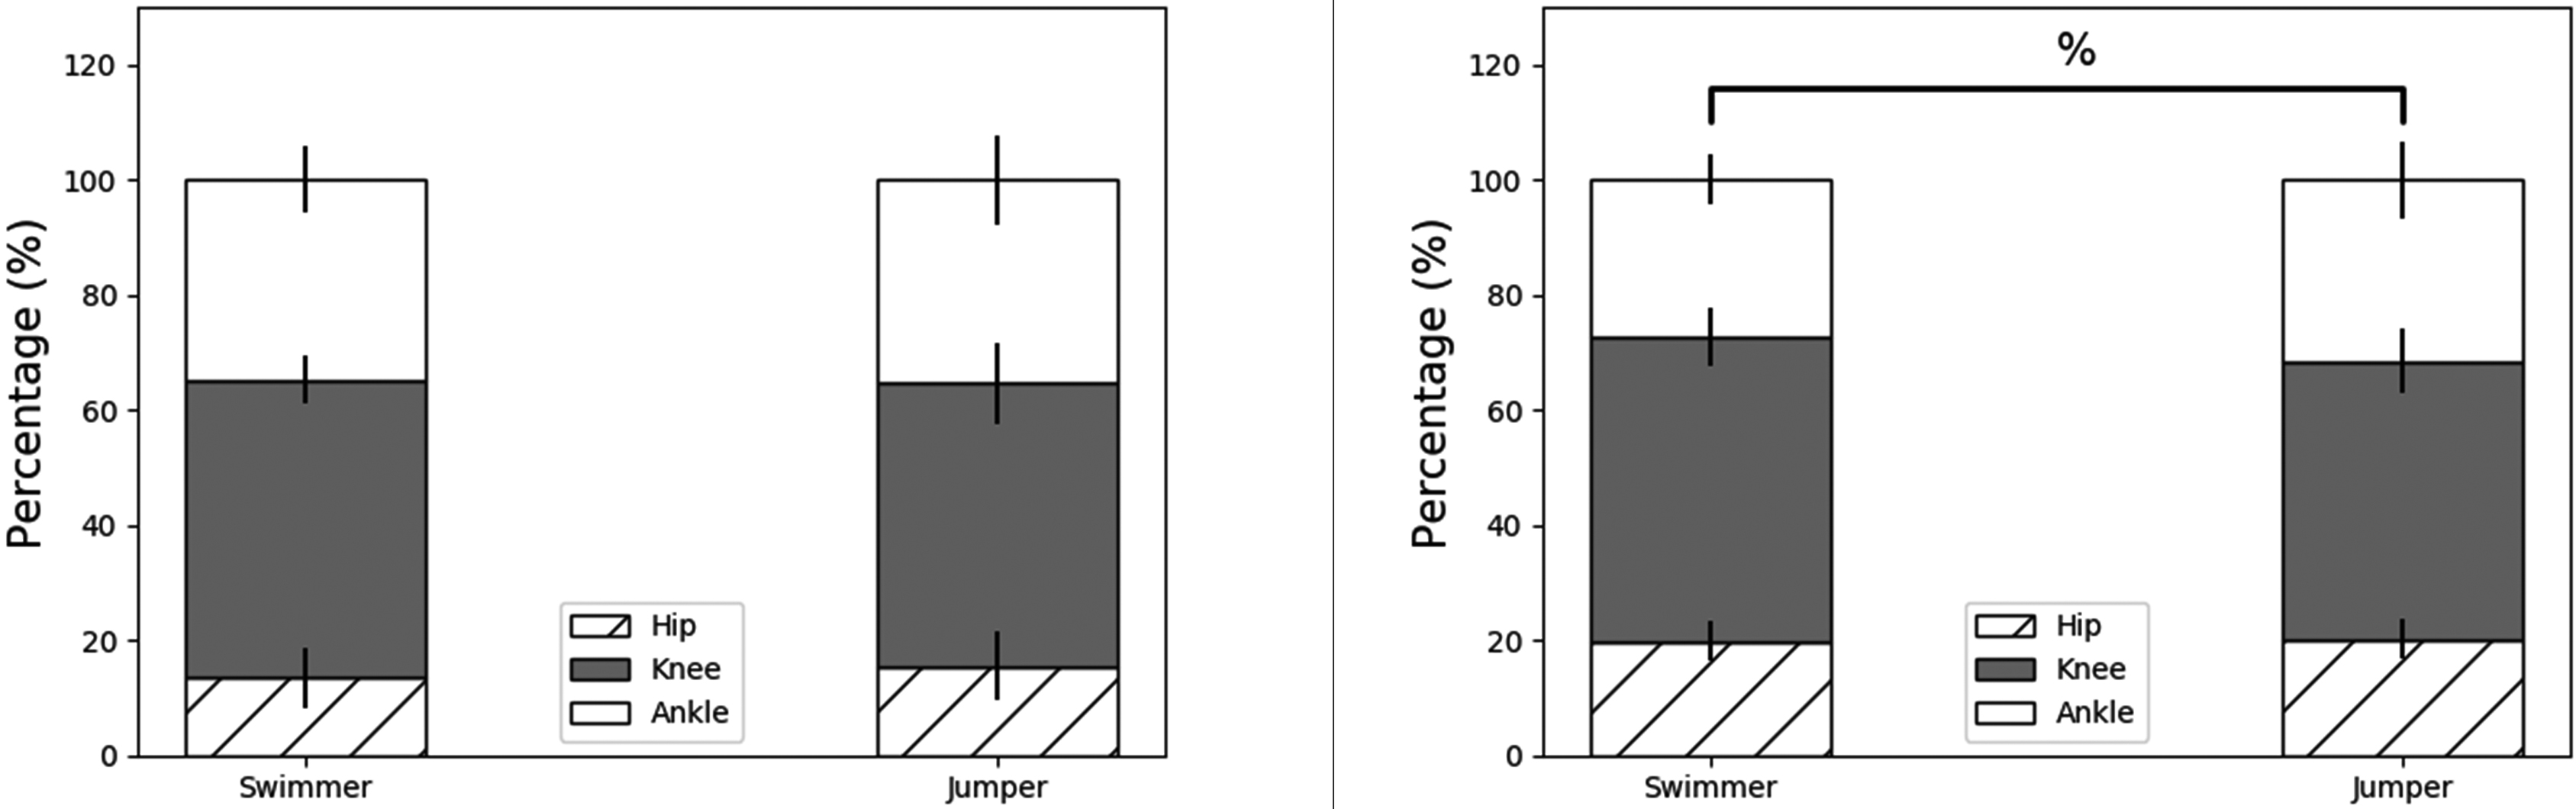 Bar plots of joint contributions to total eccentric work during drop landings (left) and drop jumps (right). % Significant difference between jumpers and swimmers in knee joint contribution.